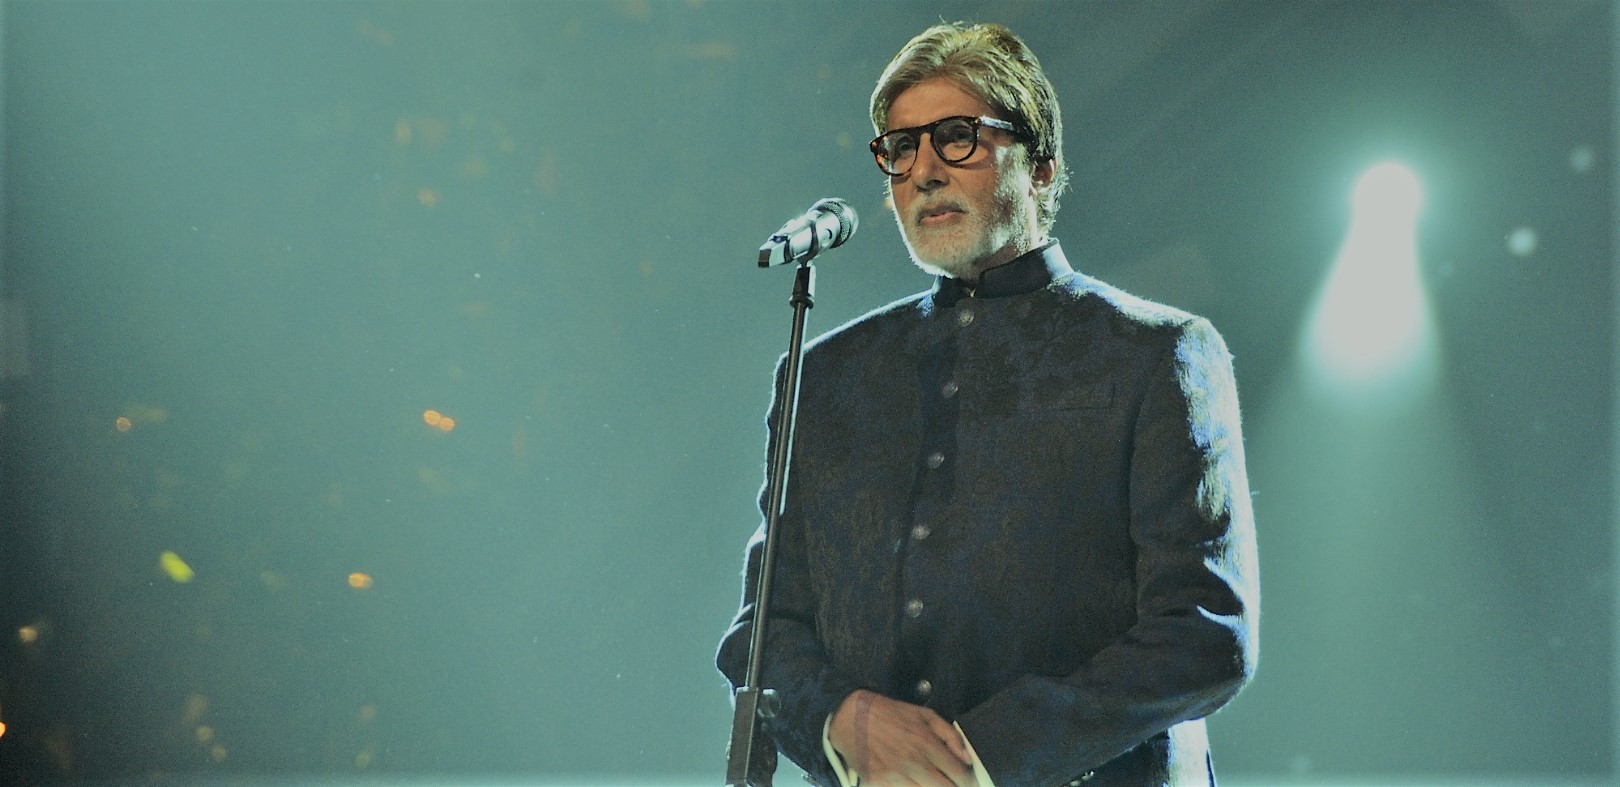 Big B insists he is just an "ordinary artiste"